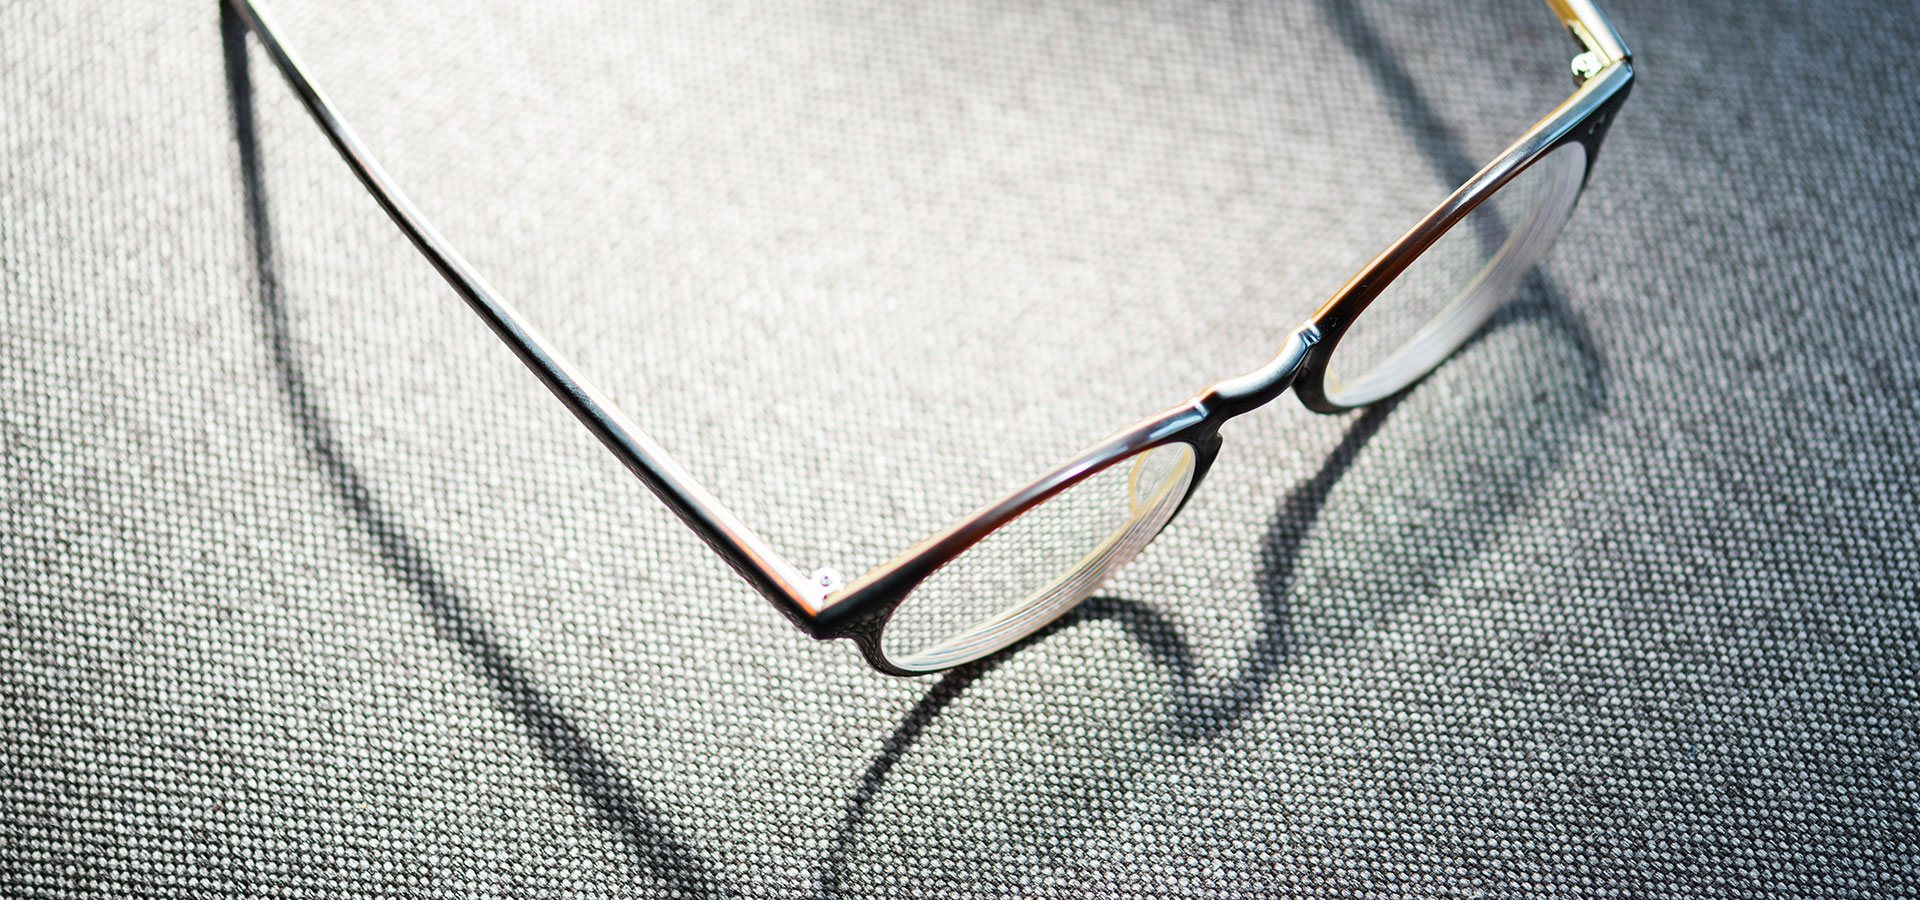 Pair of glasses sitting on table